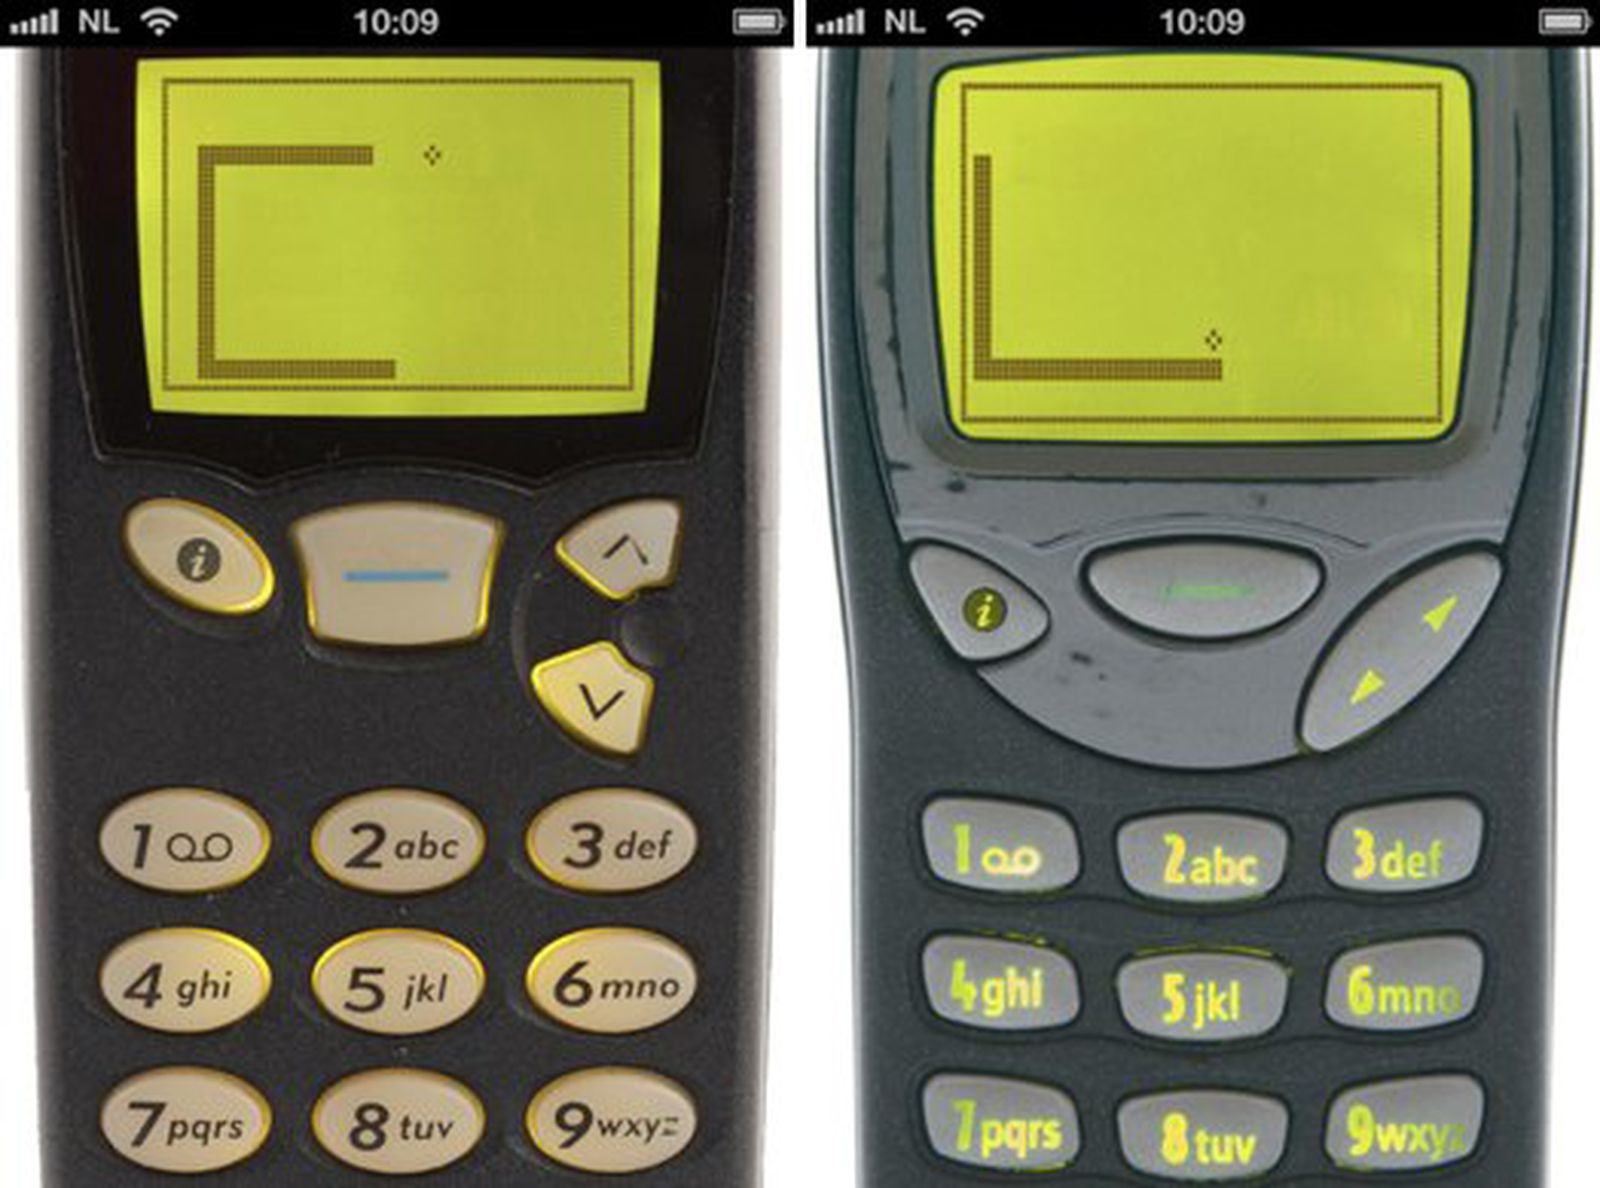 A person plays the classic mobile game Snake as the new Nokia 3310